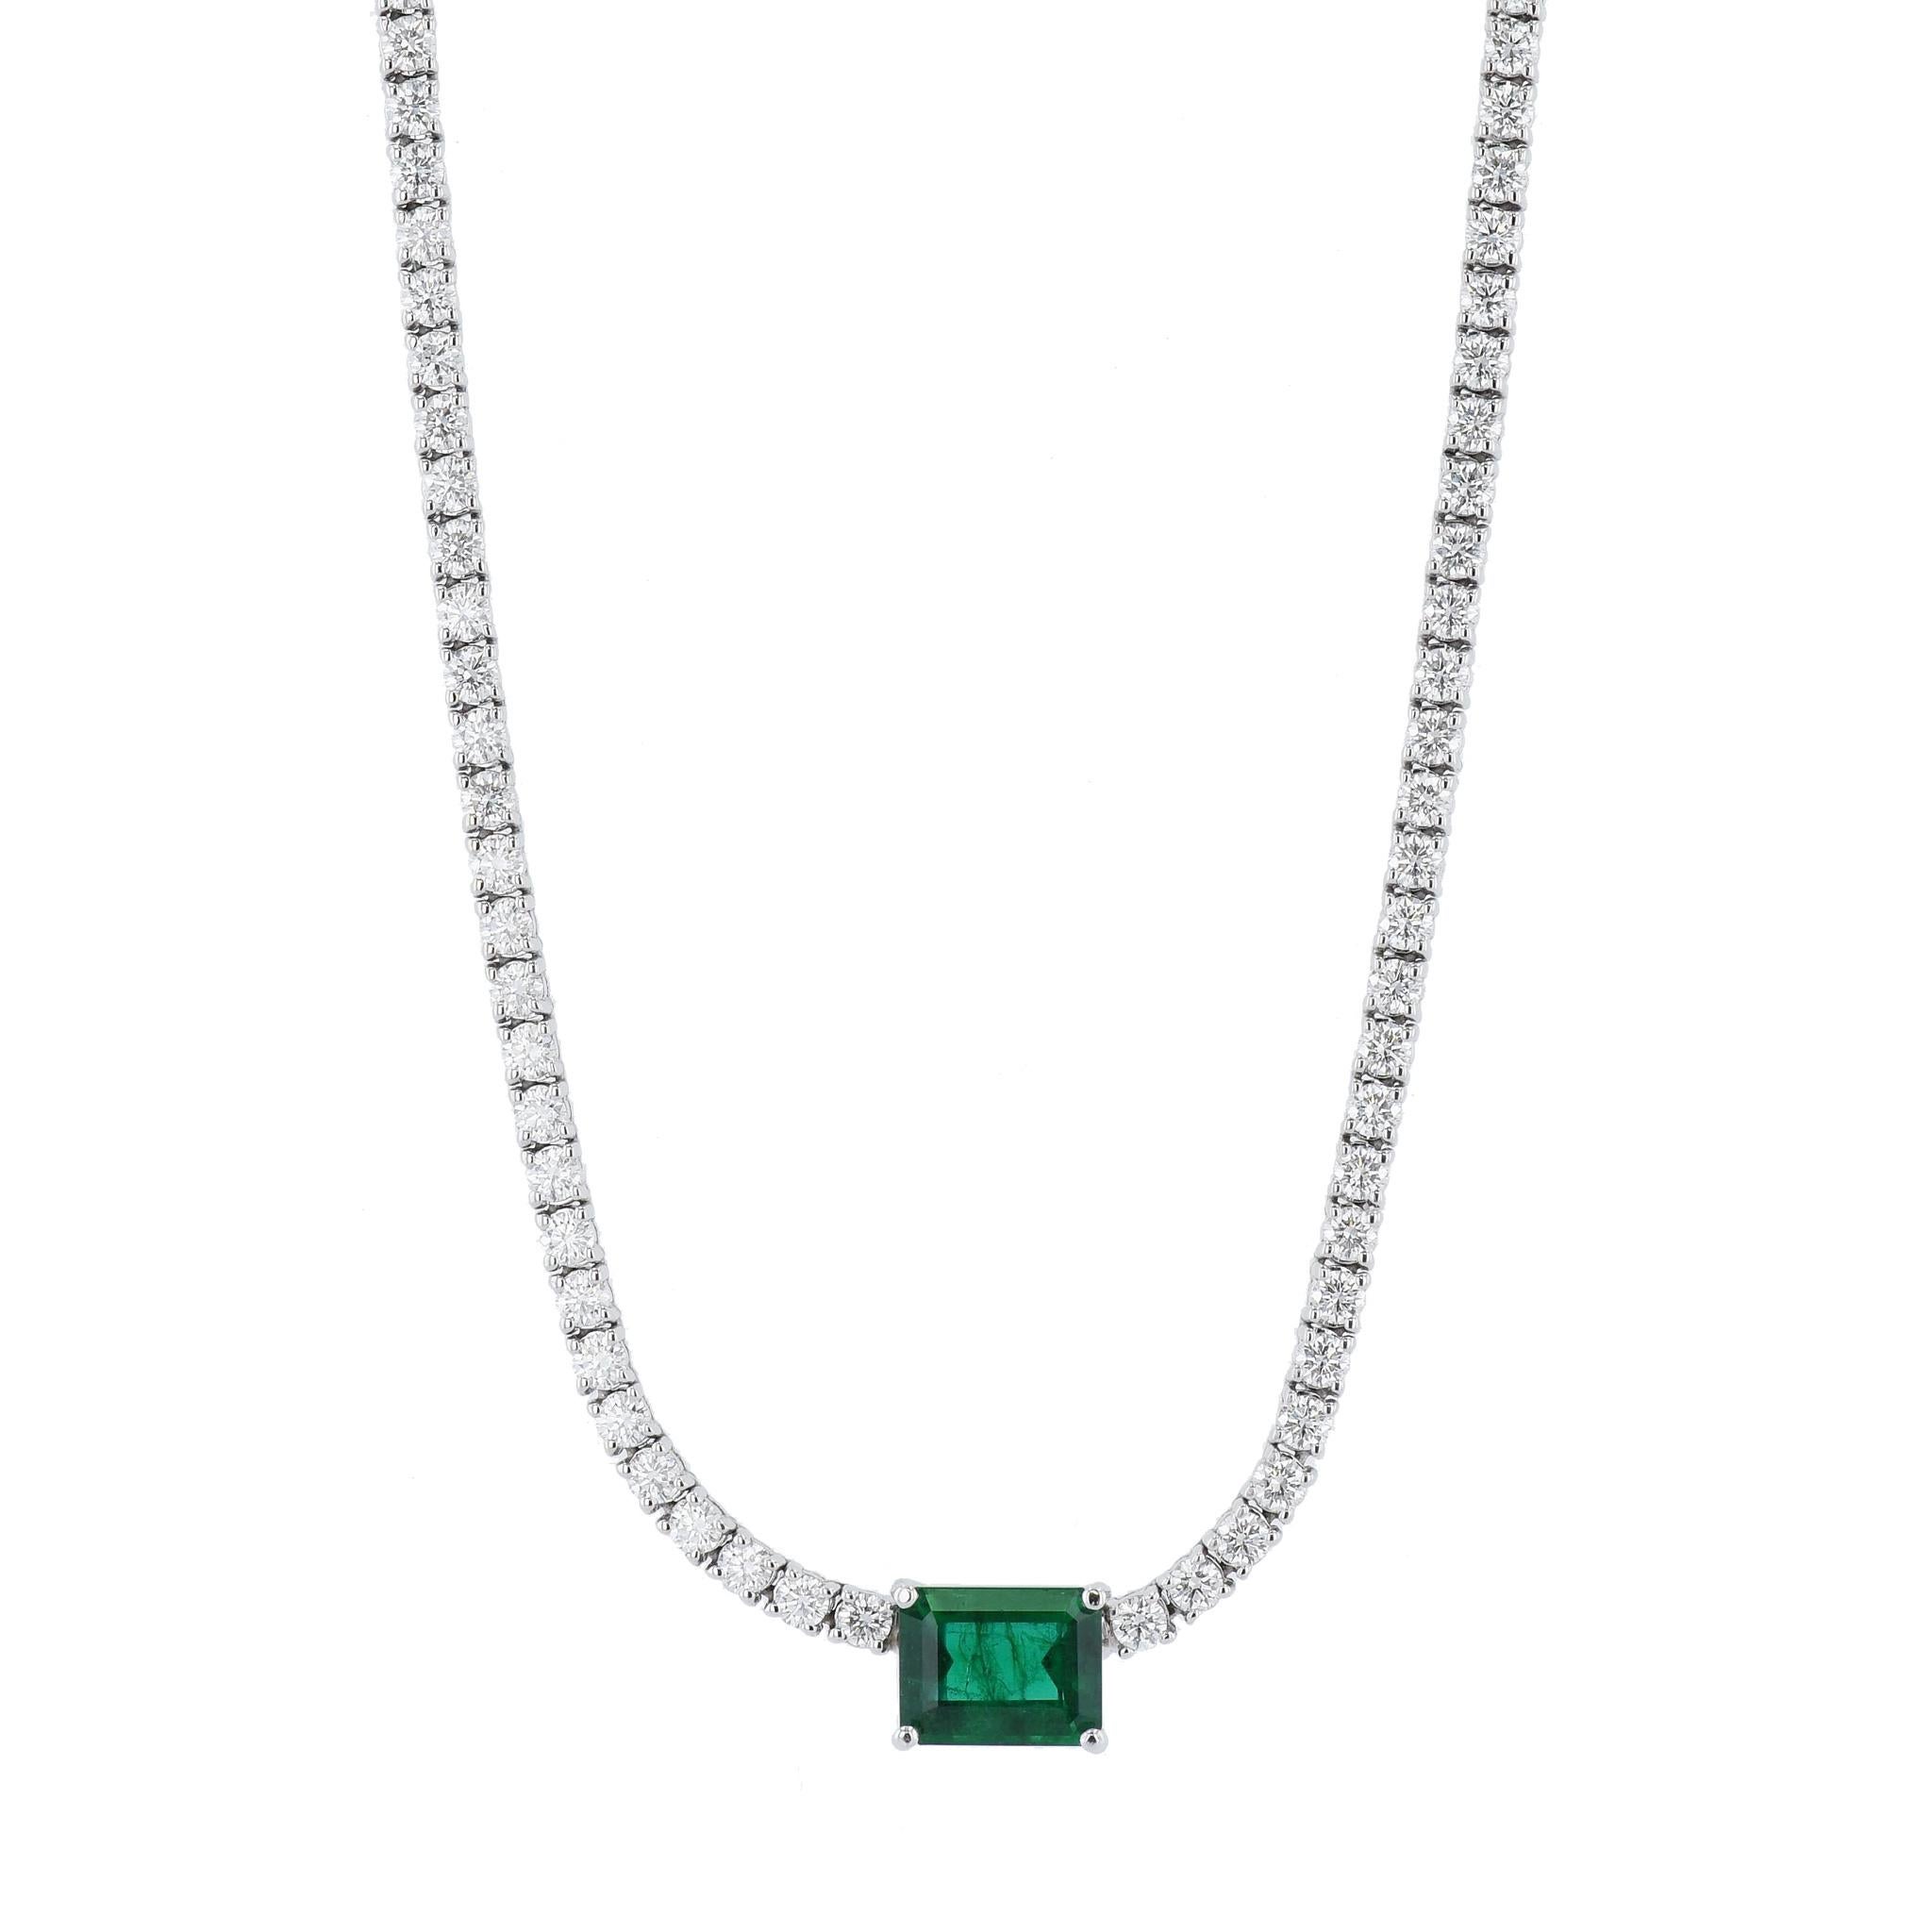 emerald and diamond tennis necklace